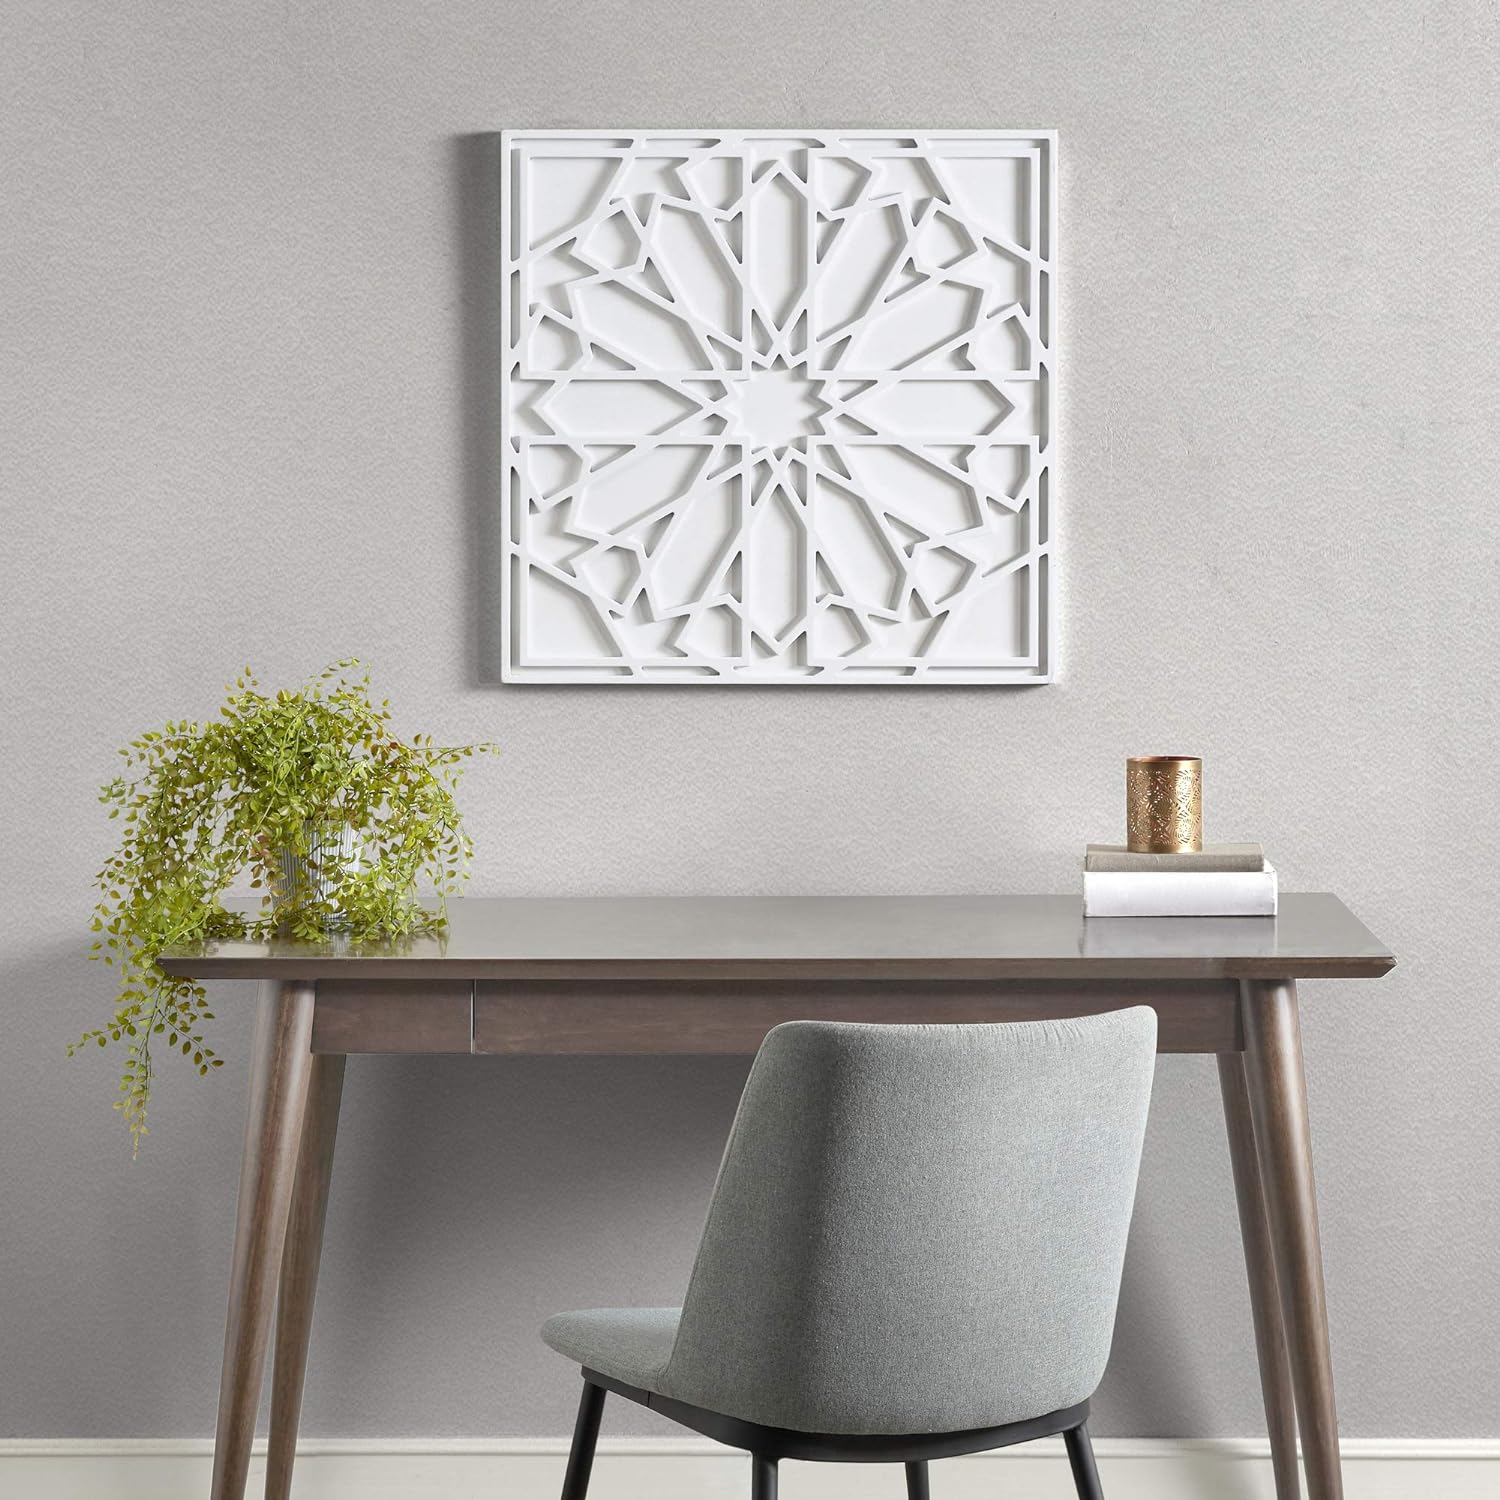 &#34;Madison Park Wall Art Living Room DÃƒÂ©cor - Boho Notion Square Wooden Carving Home Accent Modern Kitchen Dining Decoration, Ready to Hang Panel for Bedroom, 23.6&#34; x 23.6&#34;, White